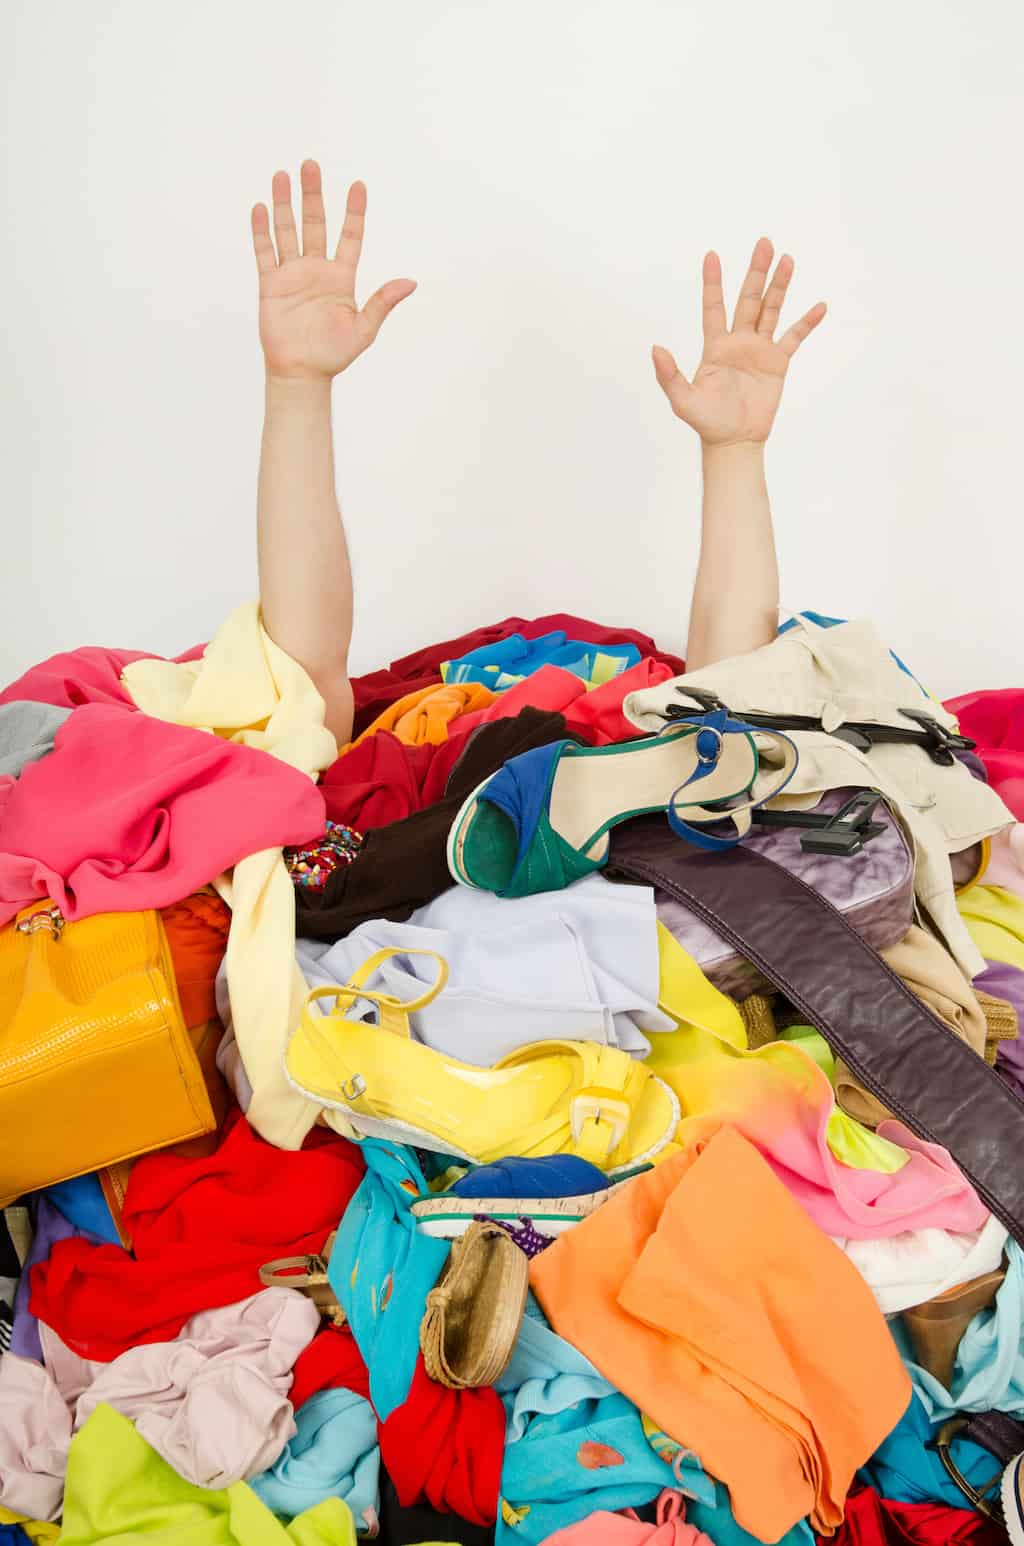 If you've decided to get a handle on your clutter, this article will offer some help with tips on how to de-clutter and for maintaining your home afterward.